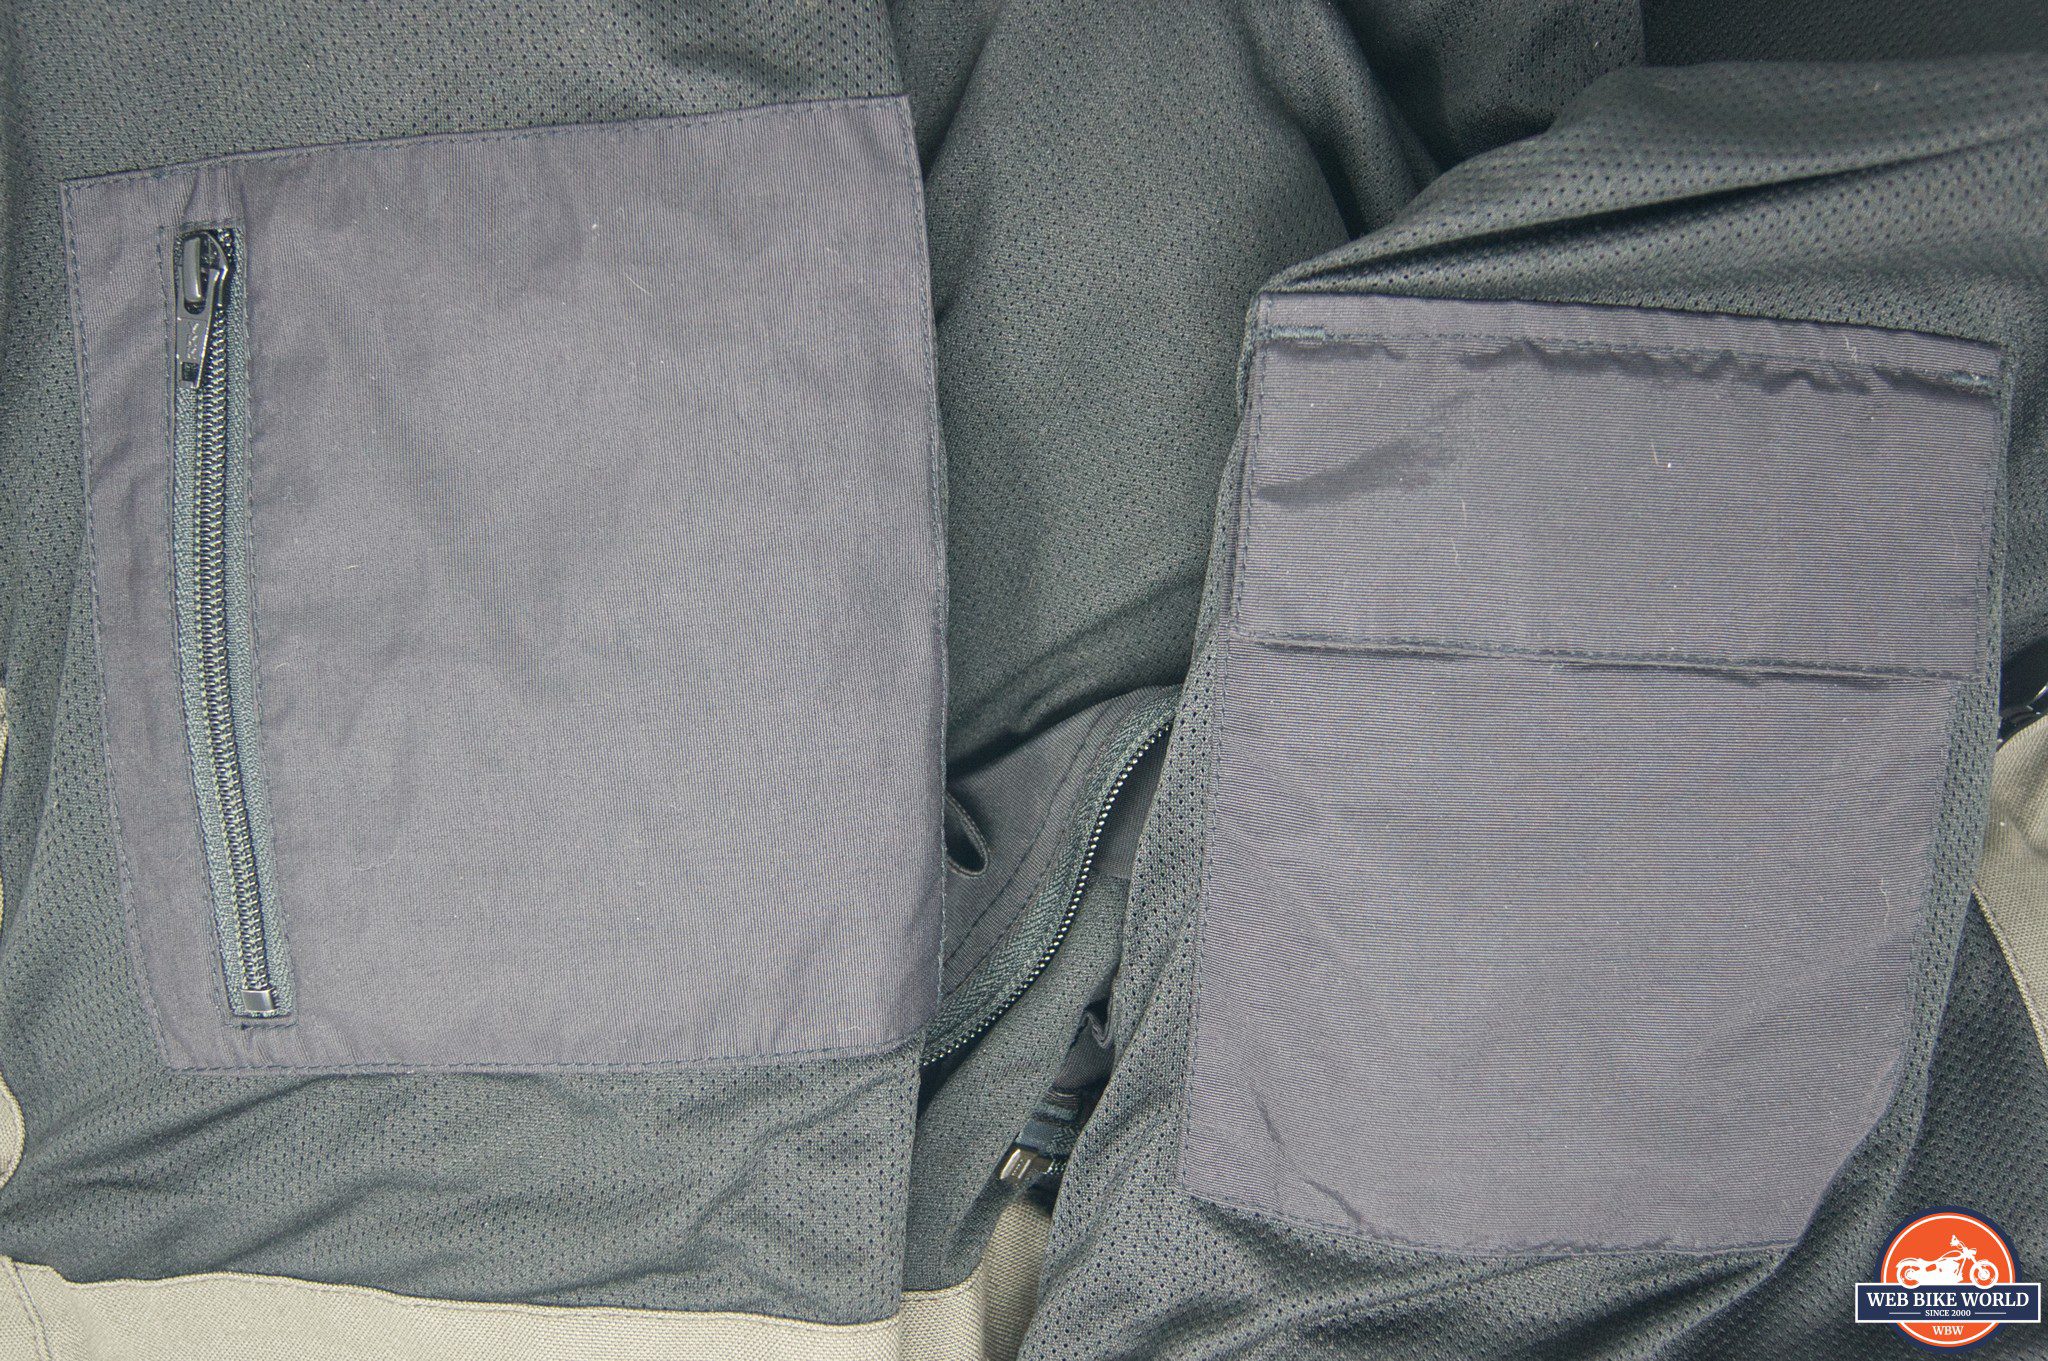 Front cargo-style pockets